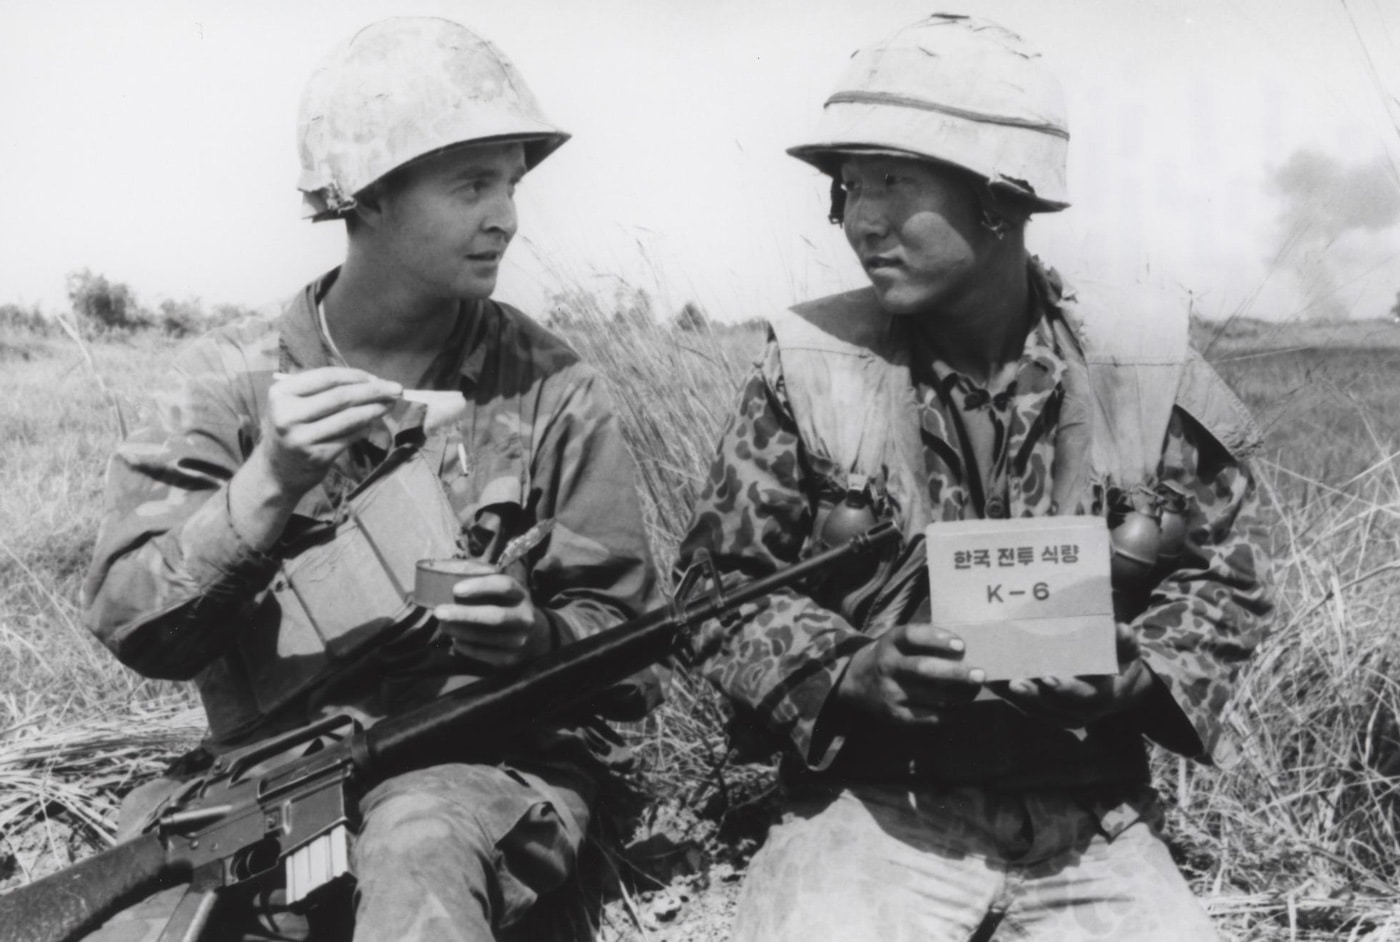 A U.S. Marine shares lunch with a Korean Marine during a break in a combat patrol in this 1968 photograph. The Korean Marine is showing the American how to use chopsticks, a refreshingly human moment in the longest and most controversial war of the 20th century.